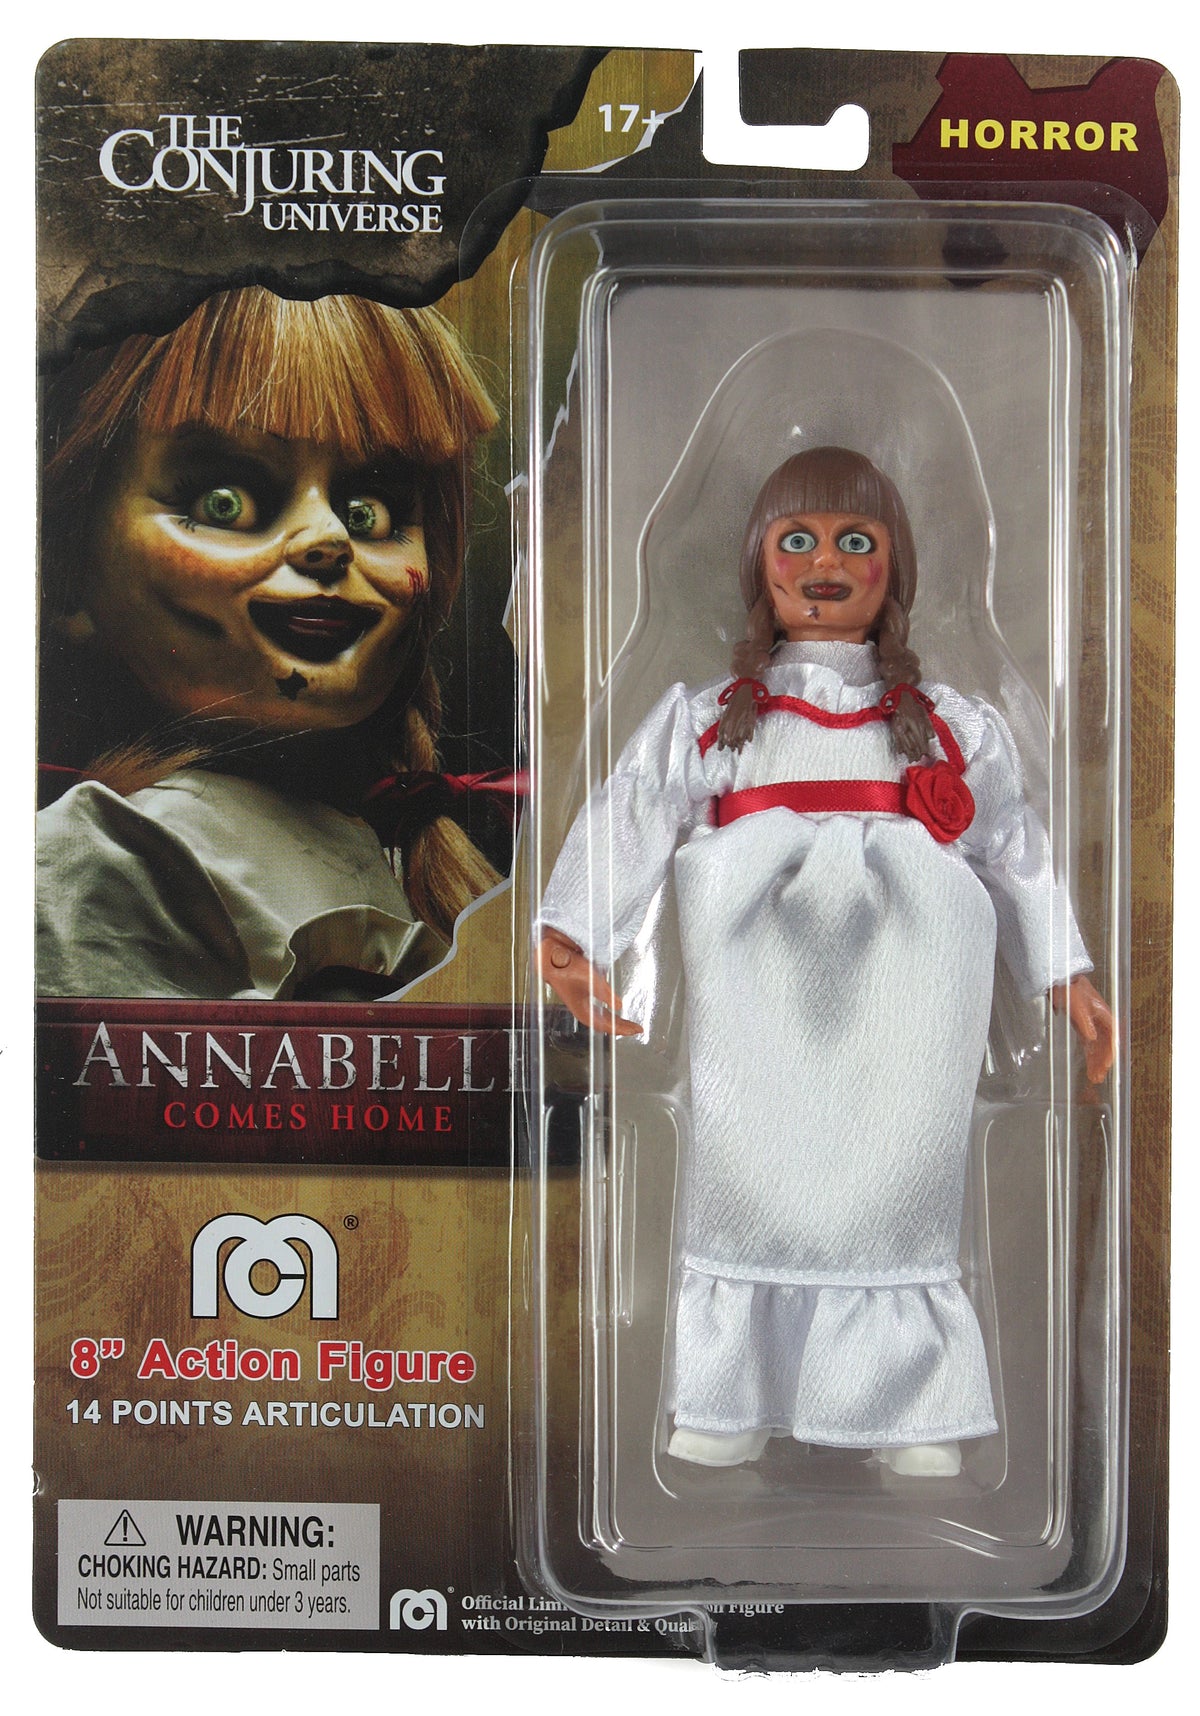 Damaged Package Mego Horror Wave 18 - The Conjuring Universe - Annabelle Comes Home 8" Action Figure